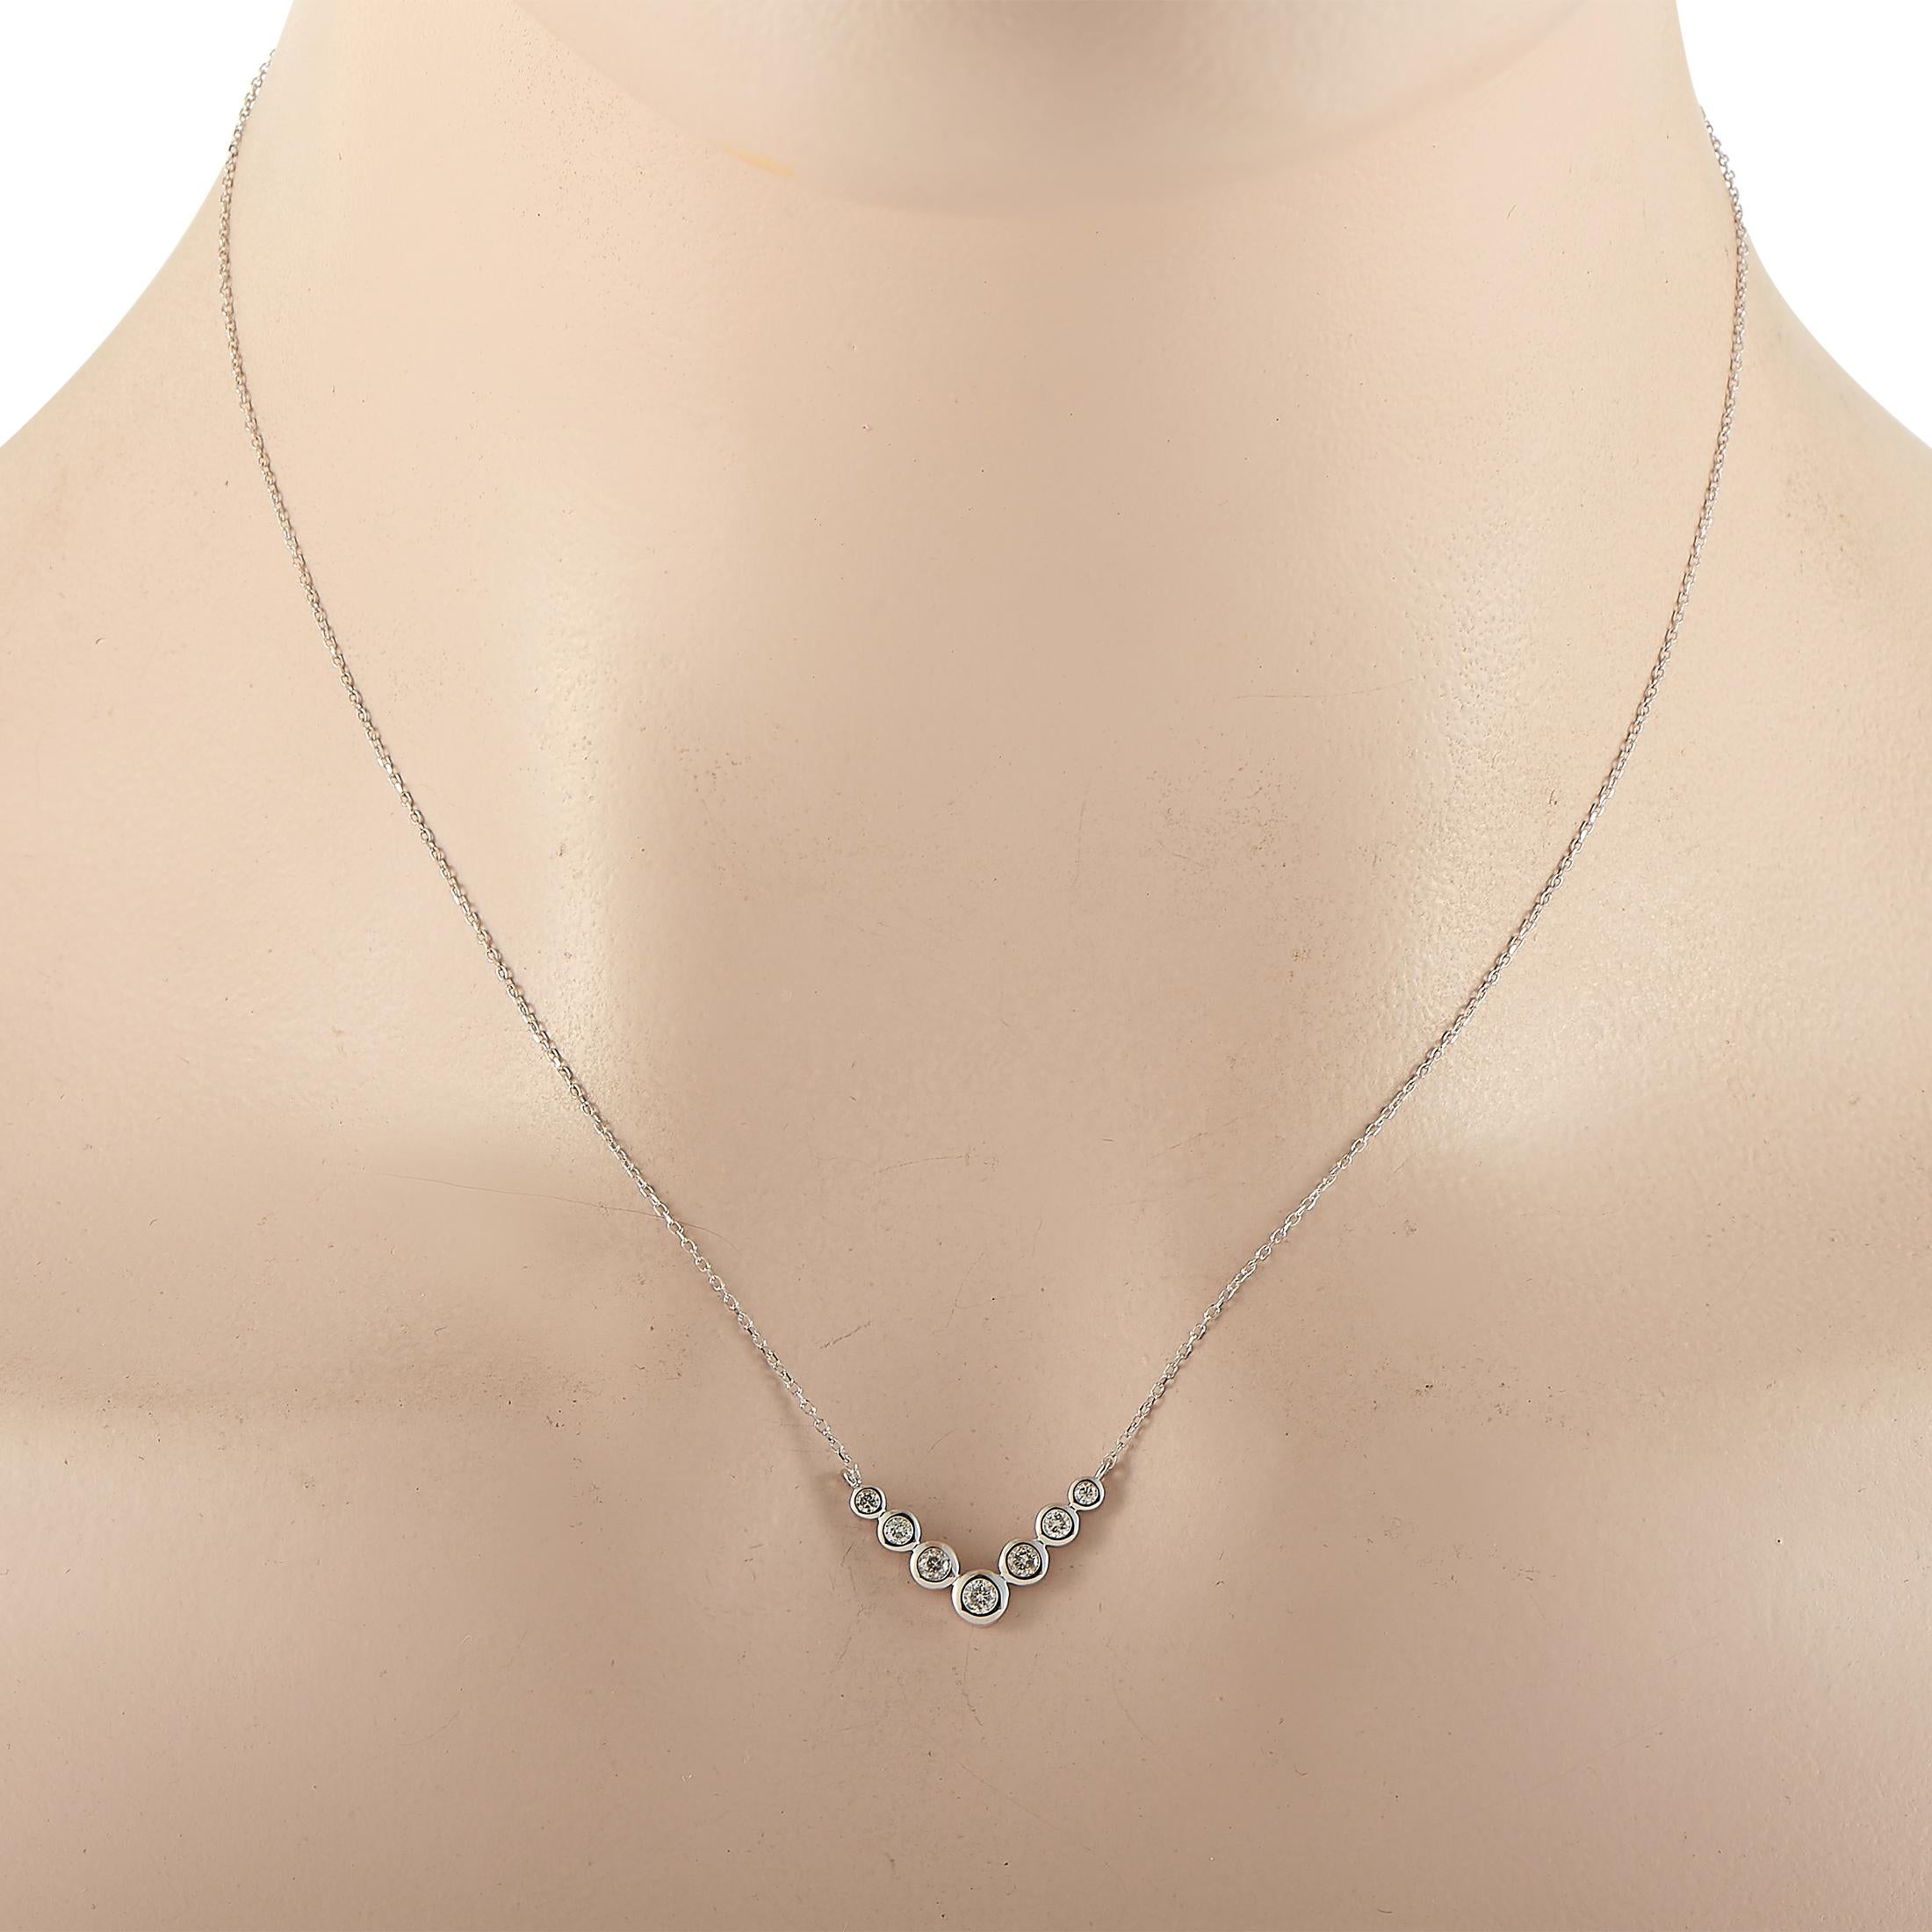 This LB Exclusive necklace is crafted from 14K white gold and weighs 2 grams. It is presented with a 16” chain and boasts a pendant that measures 0.50” in length and 0.75” in width. The necklace is set with diamonds that total 0.25 carats.
 
